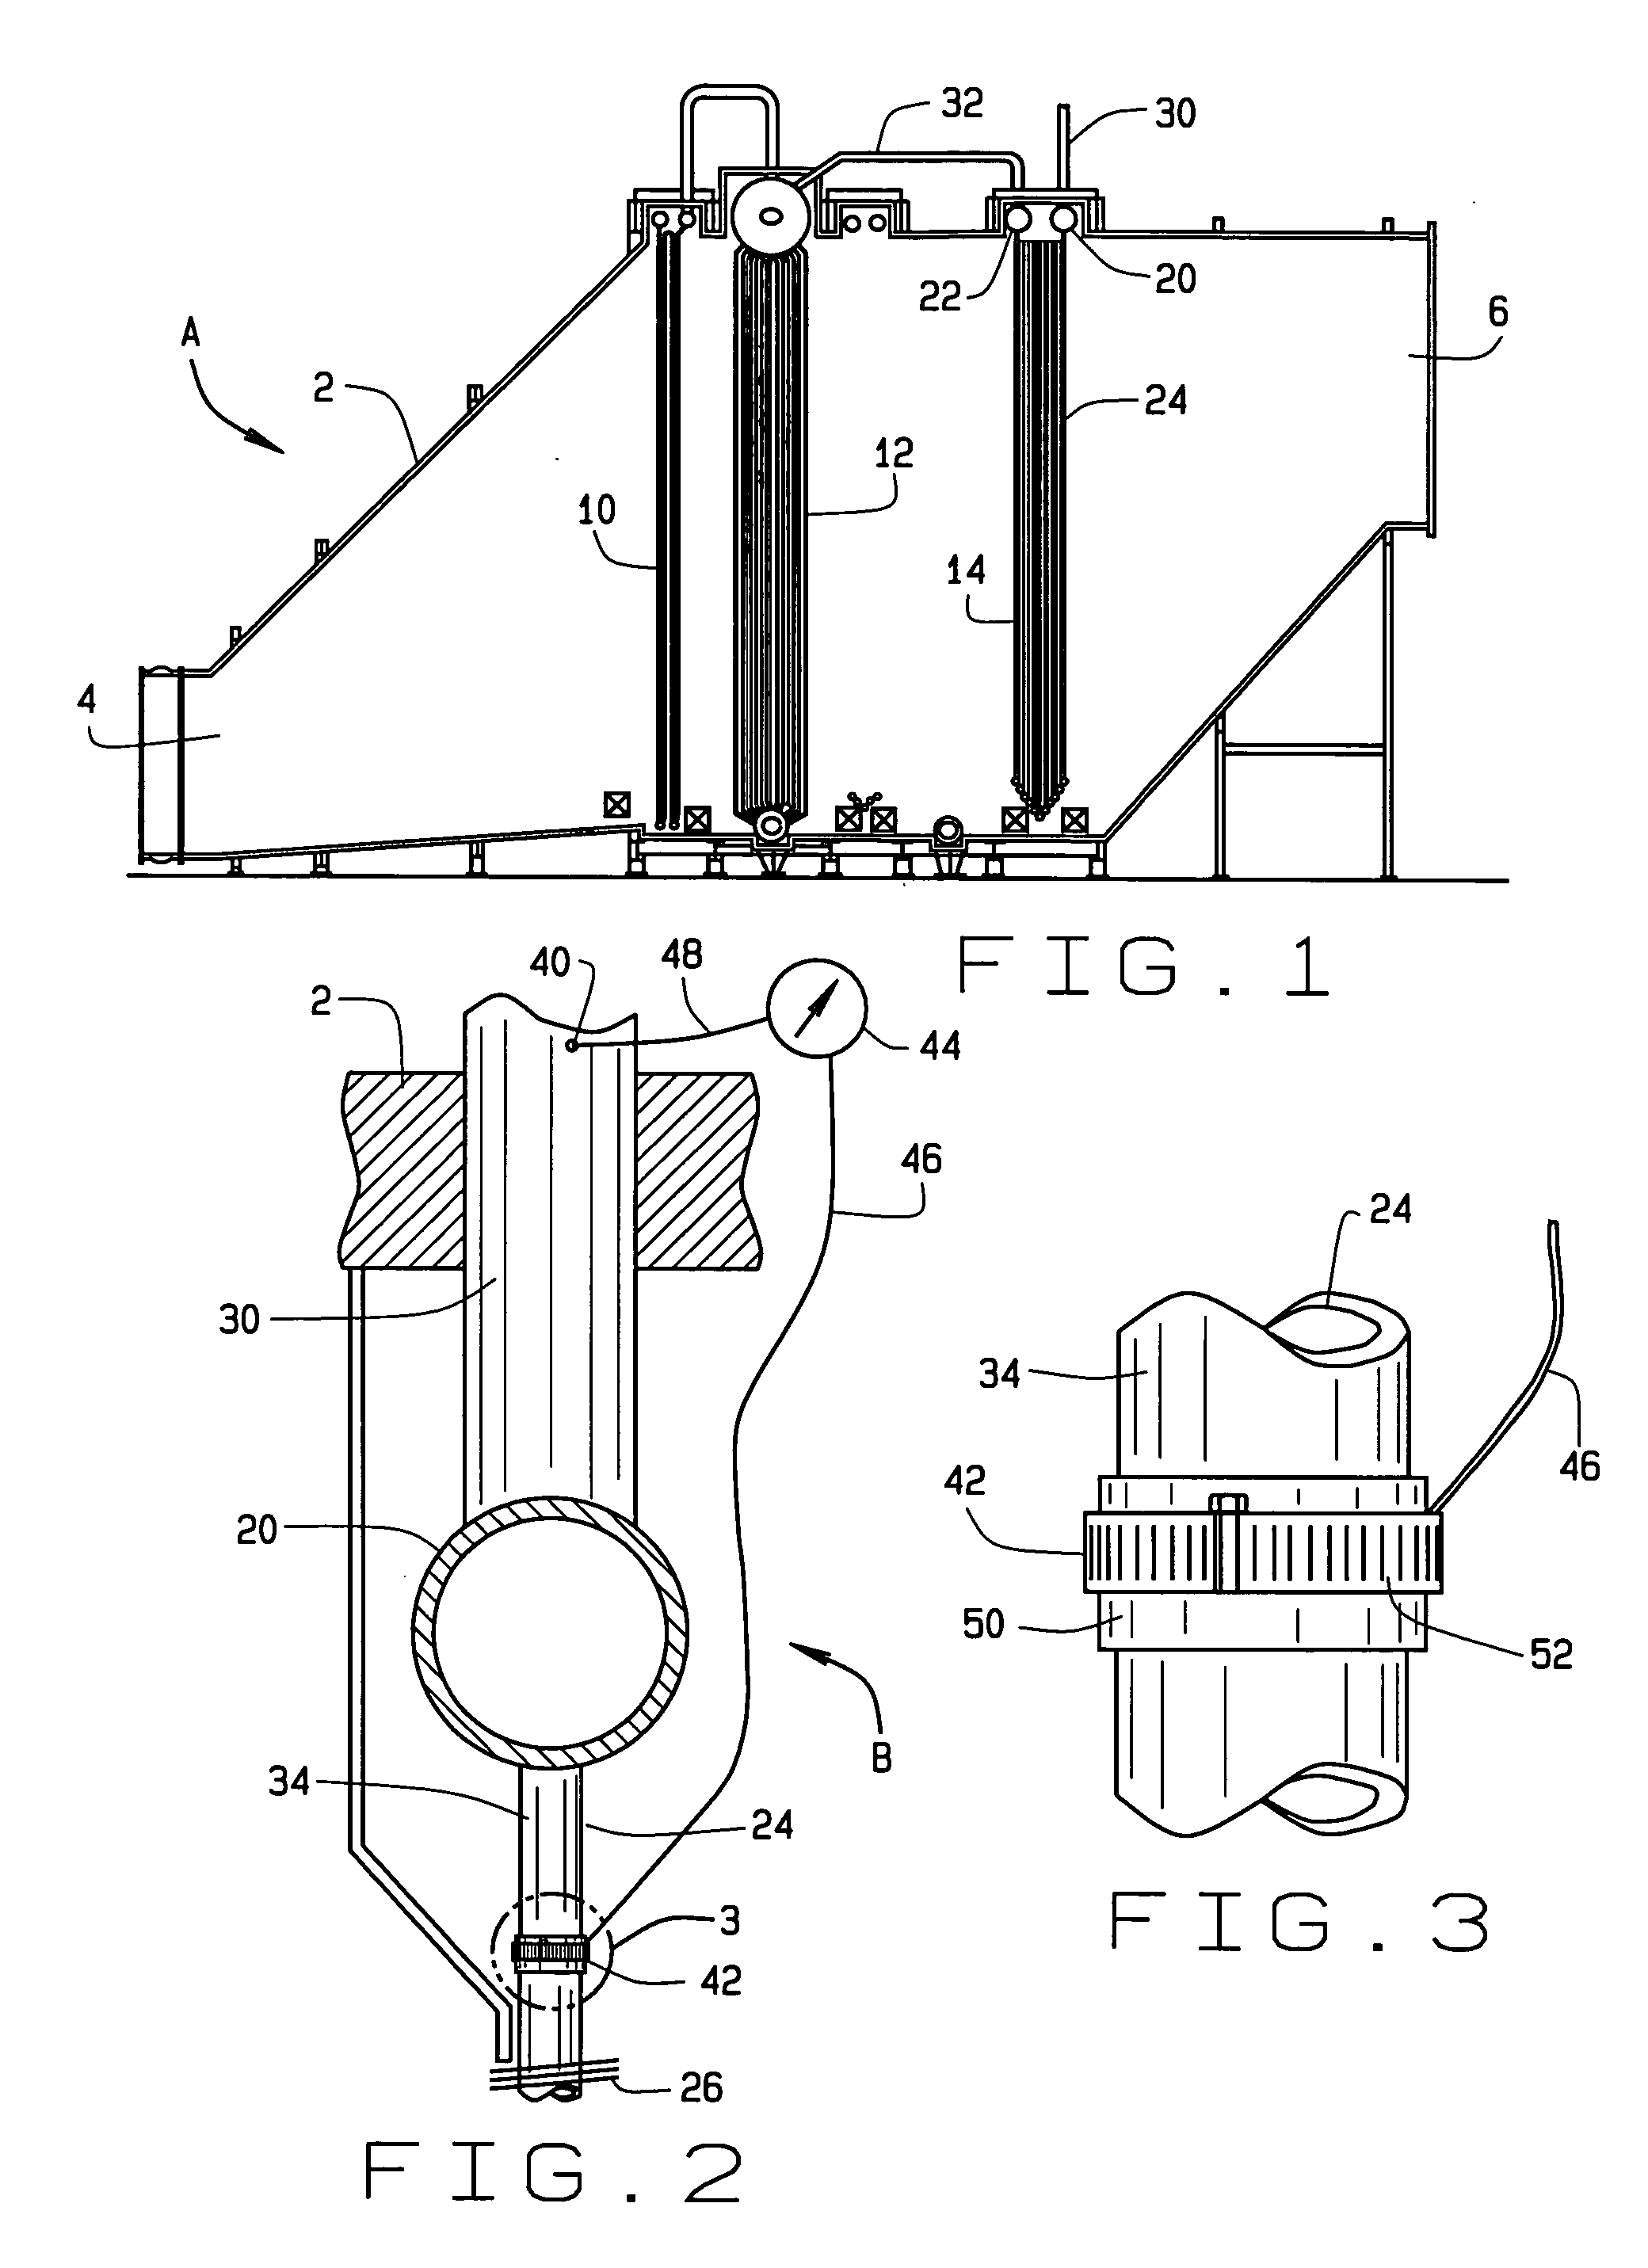 Apparatus and process for detecting condensation in a heat exchanger